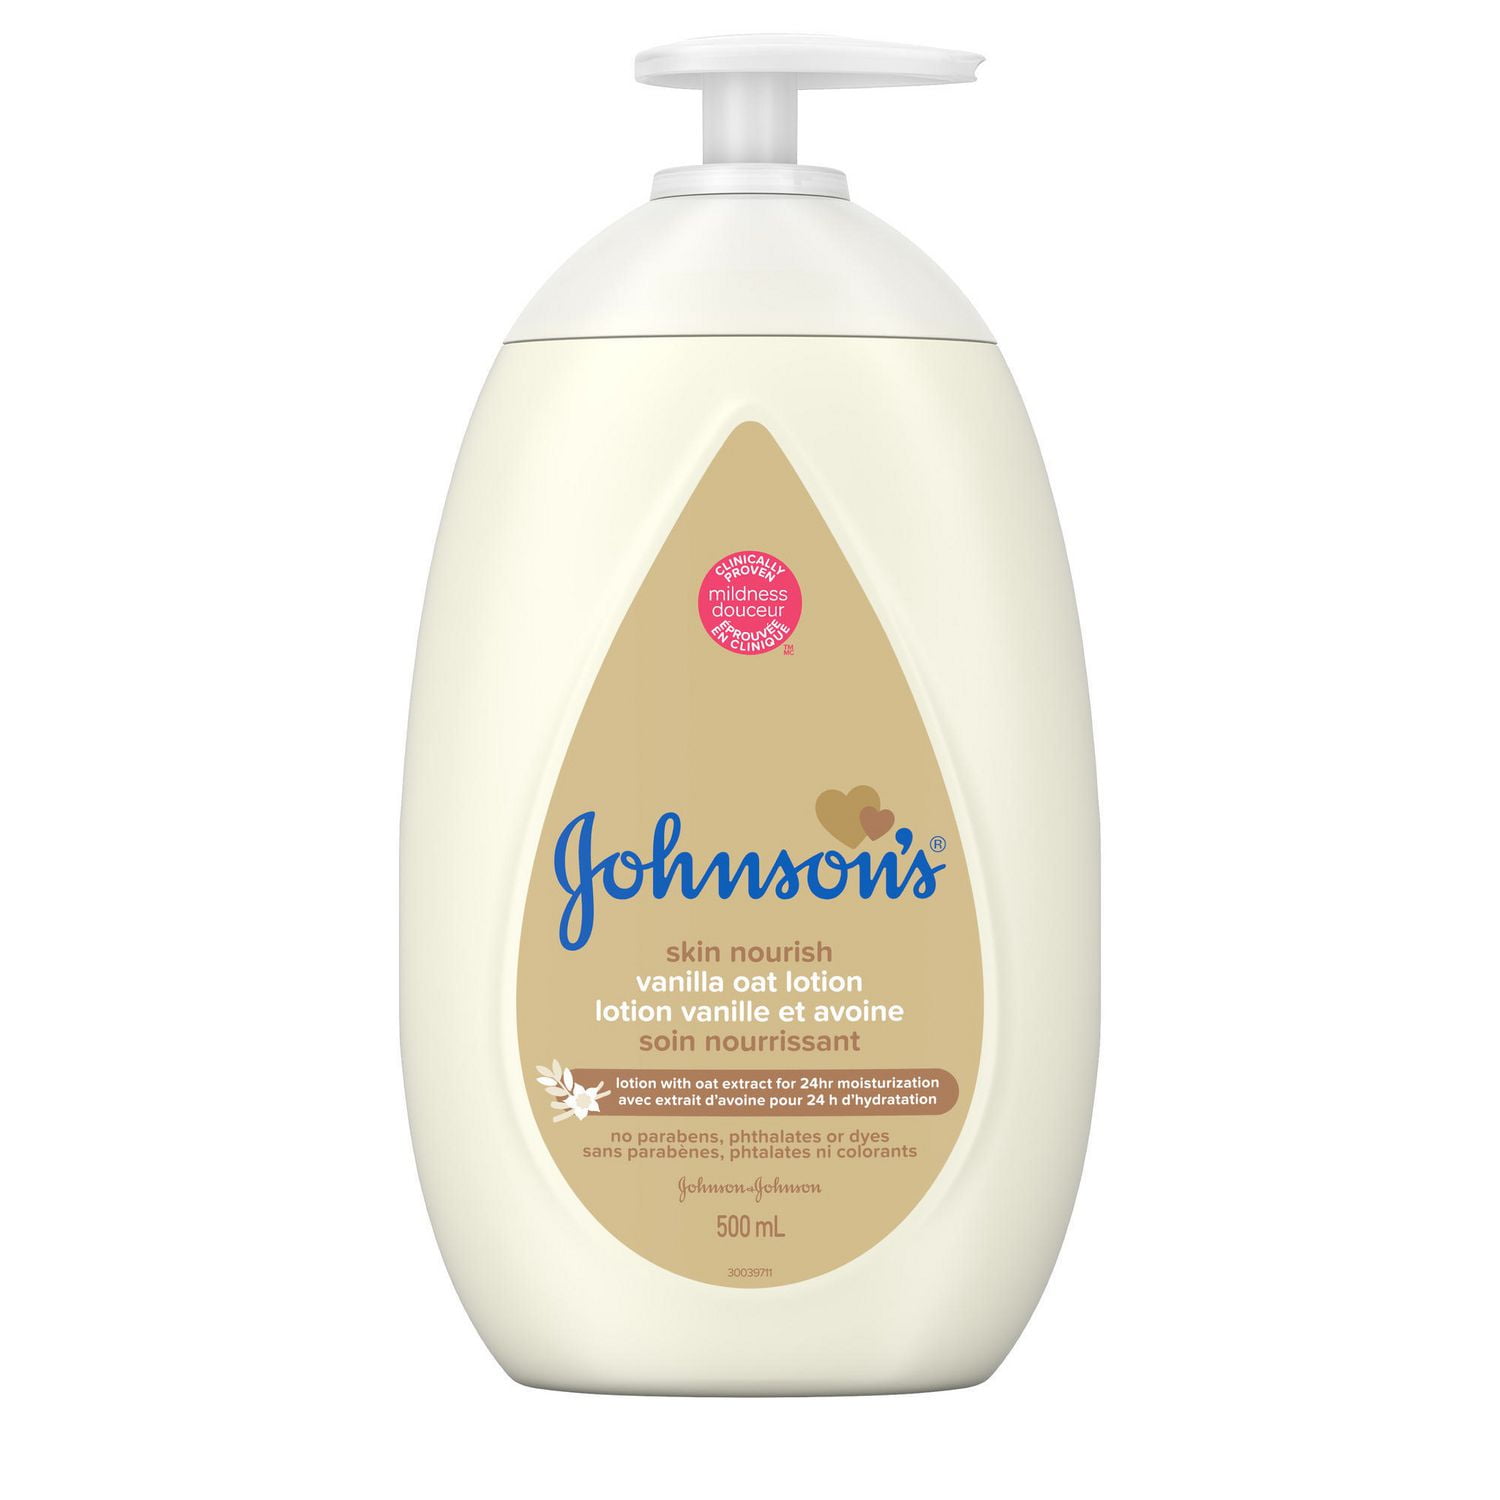 Honest baby lotion reviews in Lotions - ChickAdvisor